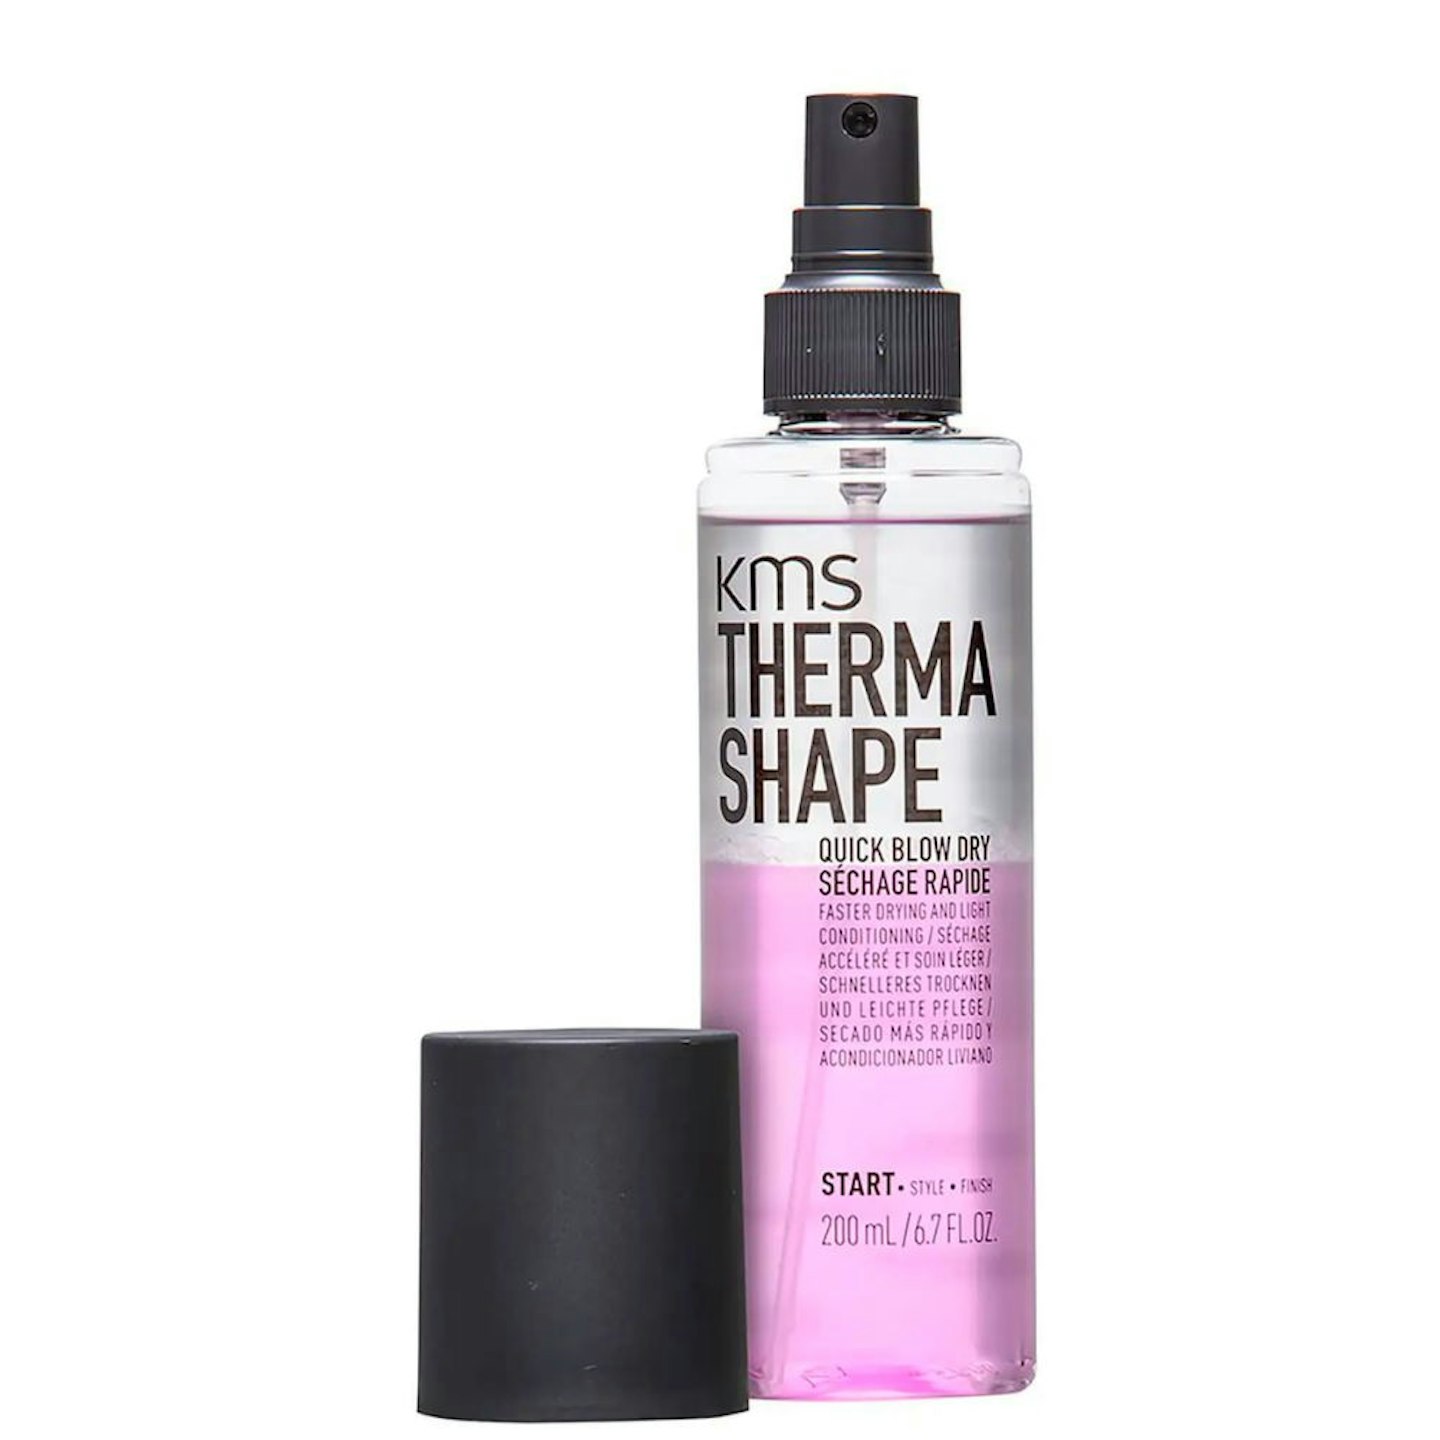 KMS ThermaShape Quick Blow Dry